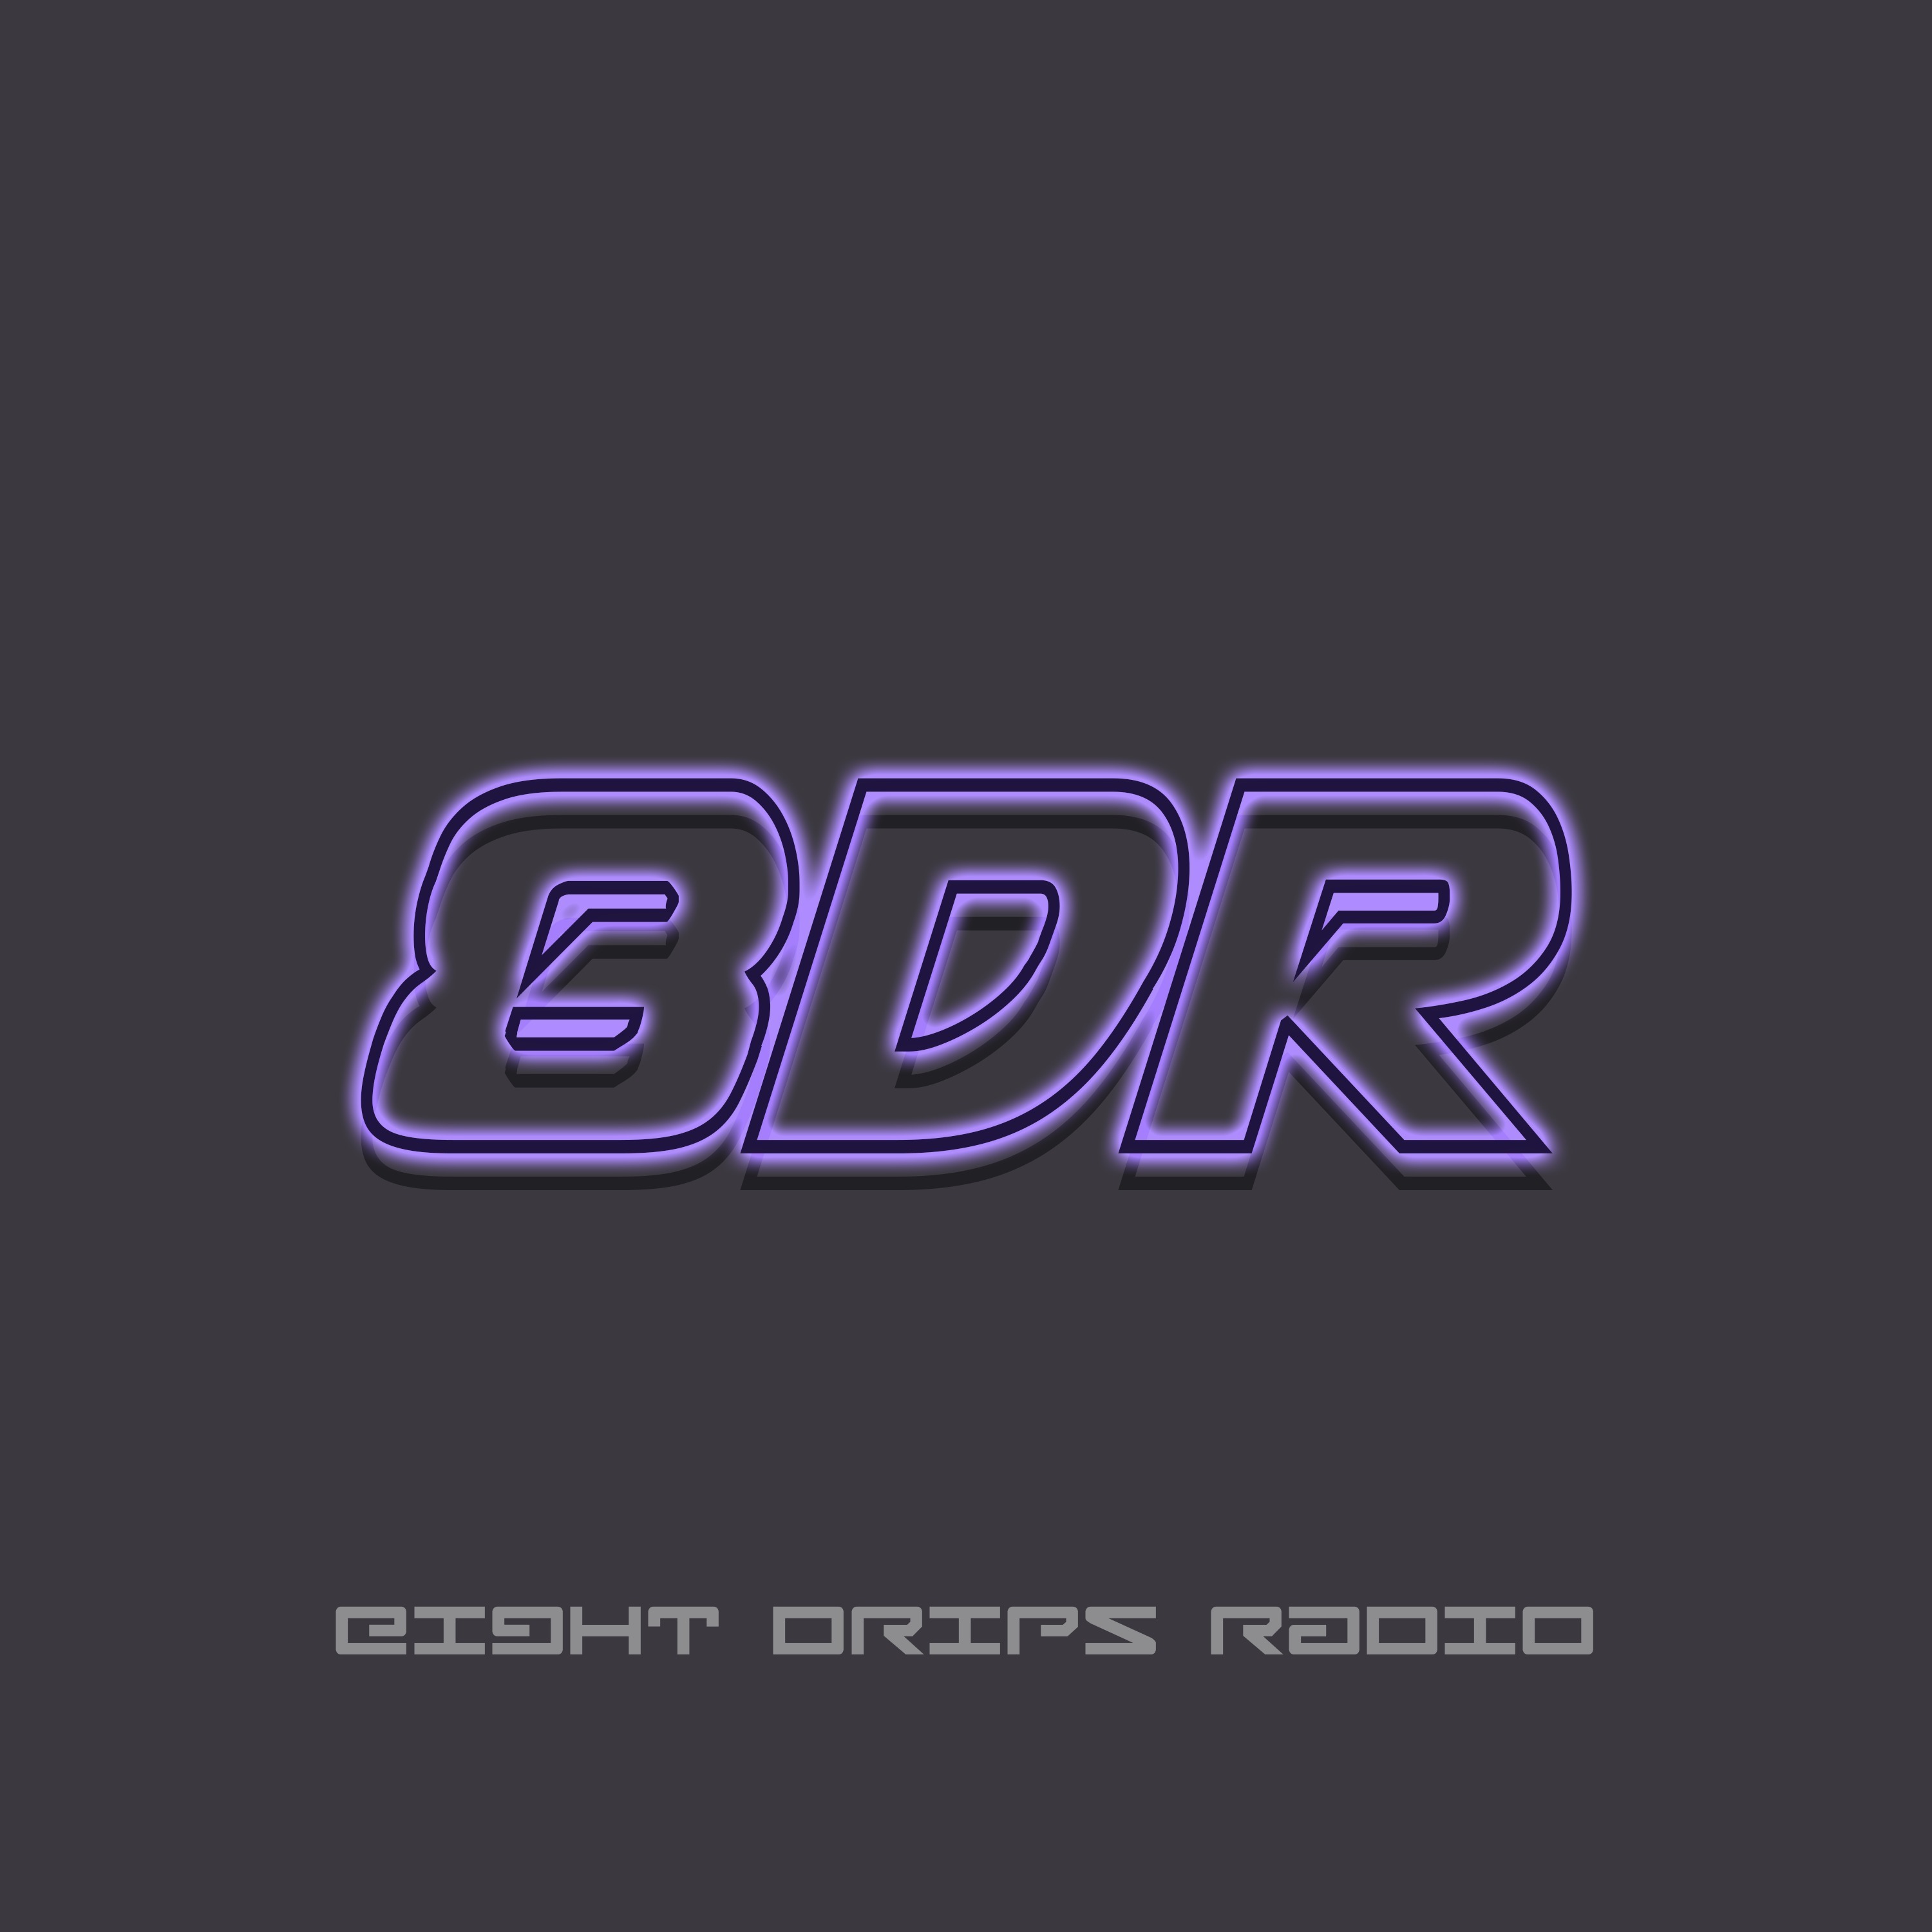 EIGHT DRIPS RADIO Episode 019 - Bass House Edition with LEBLAENG